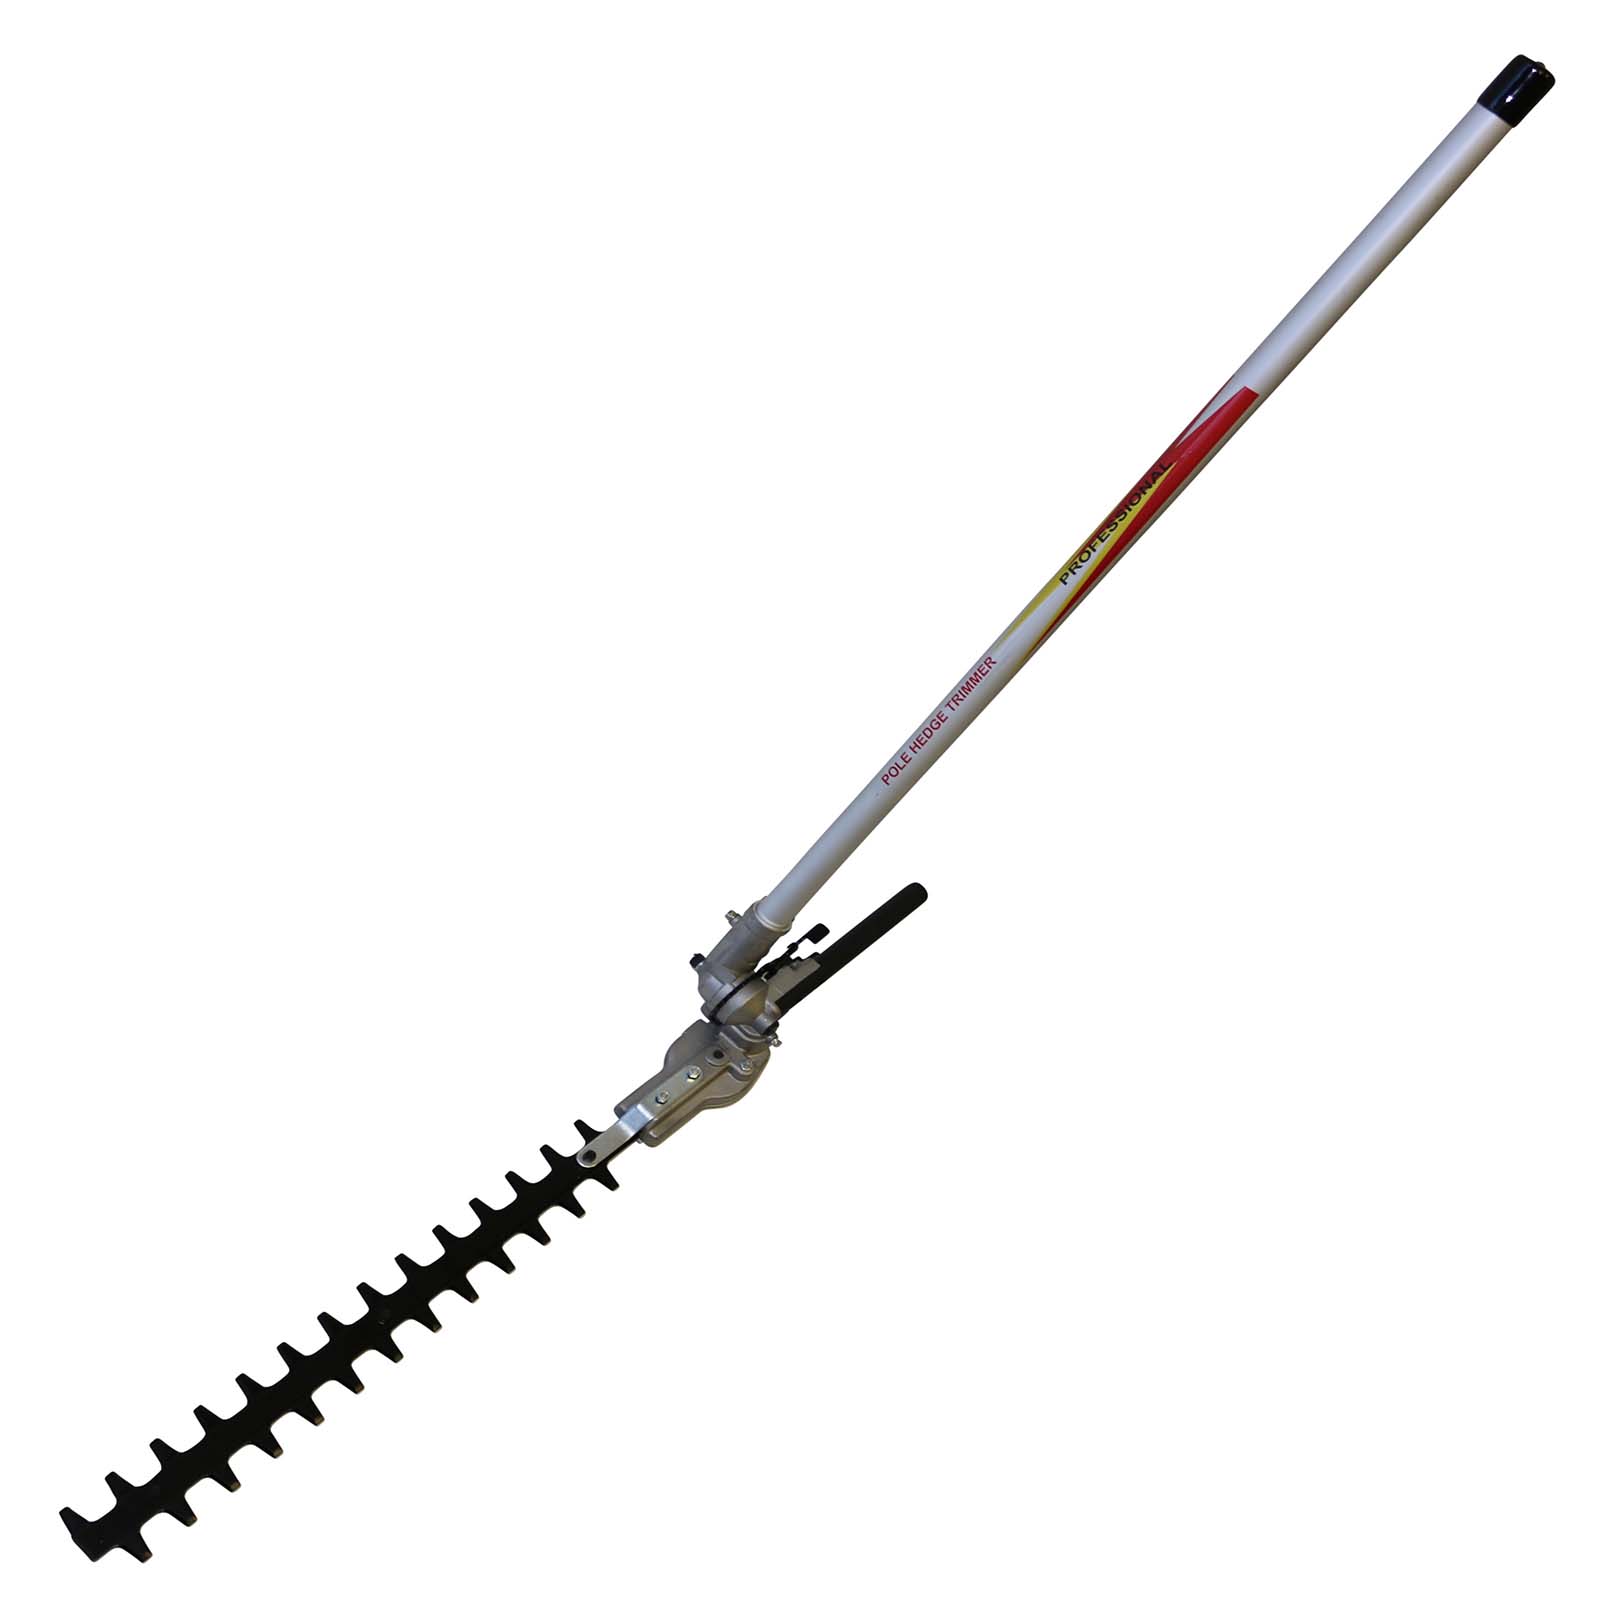 Hedge Trimmer Attachment for Multi Tool Pole Saw Brush